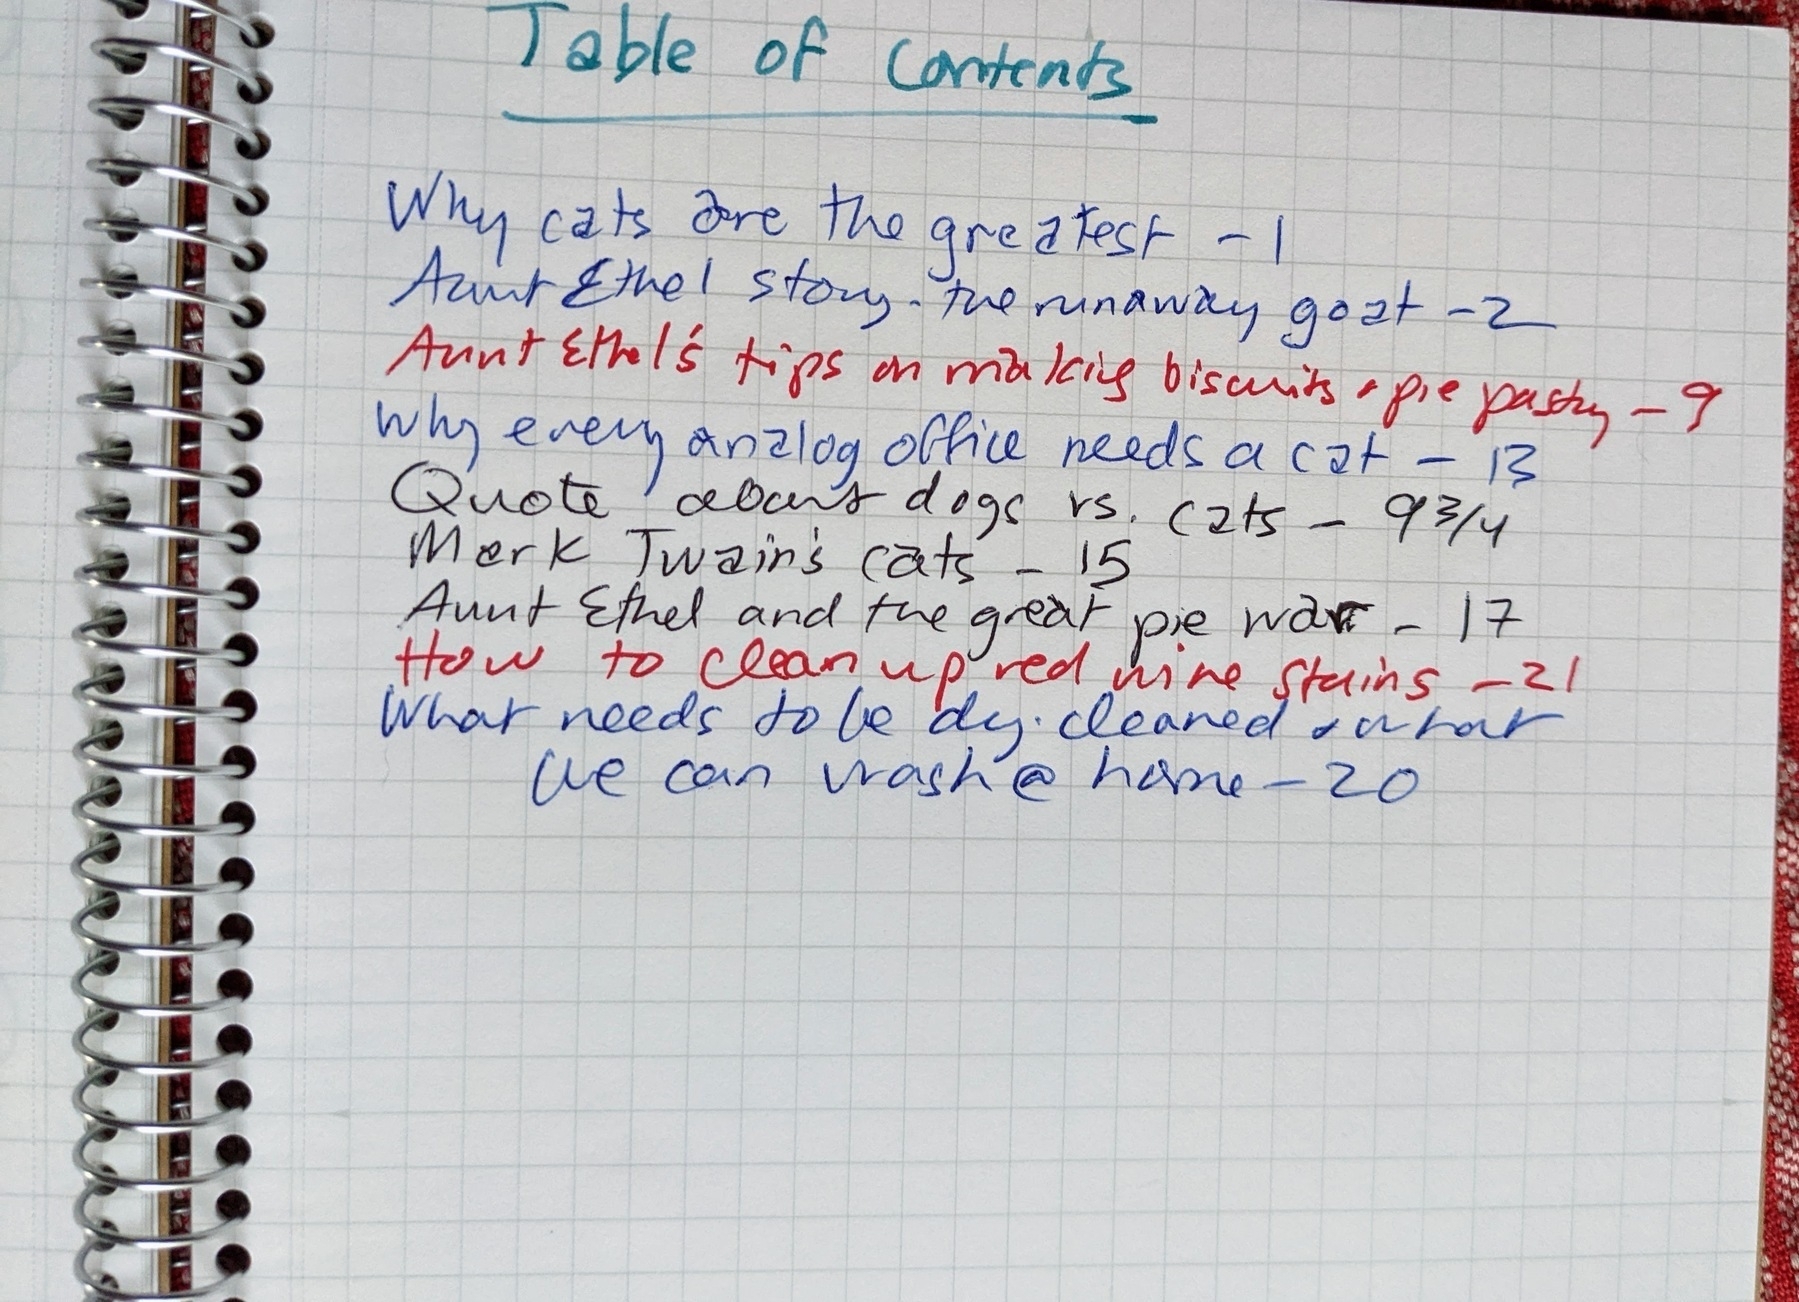 handwritten table of contents in a paper notebook, with page numbers listed next to sample titles